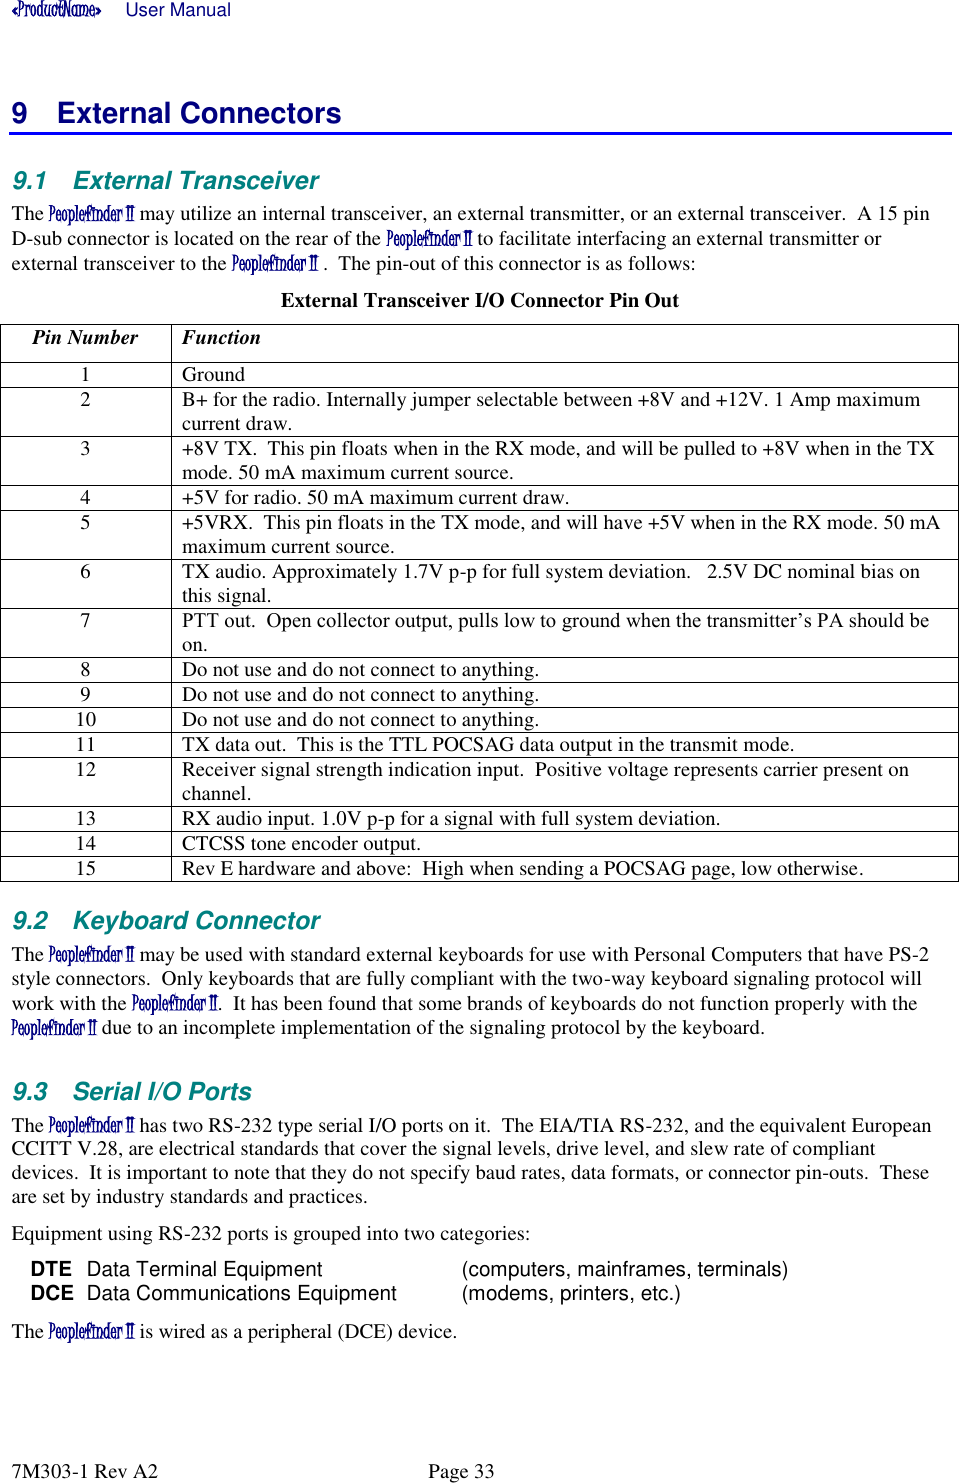 «ProductName»      User Manual      7M303-1 Rev A2  Page 33 9  External Connectors 9.1  External Transceiver The Peoplefinder II may utilize an internal transceiver, an external transmitter, or an external transceiver.  A 15 pin D-sub connector is located on the rear of the Peoplefinder II to facilitate interfacing an external transmitter or external transceiver to the Peoplefinder II .  The pin-out of this connector is as follows: External Transceiver I/O Connector Pin Out Pin Number Function 1 Ground 2 B+ for the radio. Internally jumper selectable between +8V and +12V. 1 Amp maximum current draw. 3 +8V TX.  This pin floats when in the RX mode, and will be pulled to +8V when in the TX mode. 50 mA maximum current source.  4 +5V for radio. 50 mA maximum current draw.  5 +5VRX.  This pin floats in the TX mode, and will have +5V when in the RX mode. 50 mA maximum current source.  6 TX audio. Approximately 1.7V p-p for full system deviation.   2.5V DC nominal bias on this signal.   7 PTT out.  Open collector output, pulls low to ground when the transmitter’s PA should be on.   8 Do not use and do not connect to anything.  9 Do not use and do not connect to anything.  10 Do not use and do not connect to anything.  11 TX data out.  This is the TTL POCSAG data output in the transmit mode.  12 Receiver signal strength indication input.  Positive voltage represents carrier present on channel. 13 RX audio input. 1.0V p-p for a signal with full system deviation.  14 CTCSS tone encoder output. 15 Rev E hardware and above:  High when sending a POCSAG page, low otherwise.  9.2  Keyboard Connector The Peoplefinder II may be used with standard external keyboards for use with Personal Computers that have PS-2 style connectors.  Only keyboards that are fully compliant with the two-way keyboard signaling protocol will work with the Peoplefinder II.  It has been found that some brands of keyboards do not function properly with the Peoplefinder II due to an incomplete implementation of the signaling protocol by the keyboard. 9.3  Serial I/O Ports The Peoplefinder II has two RS-232 type serial I/O ports on it.  The EIA/TIA RS-232, and the equivalent European CCITT V.28, are electrical standards that cover the signal levels, drive level, and slew rate of compliant devices.  It is important to note that they do not specify baud rates, data formats, or connector pin-outs.  These are set by industry standards and practices.   Equipment using RS-232 ports is grouped into two categories: DTE  Data Terminal Equipment     (computers, mainframes, terminals) DCE Data Communications Equipment   (modems, printers, etc.) The Peoplefinder II is wired as a peripheral (DCE) device.   